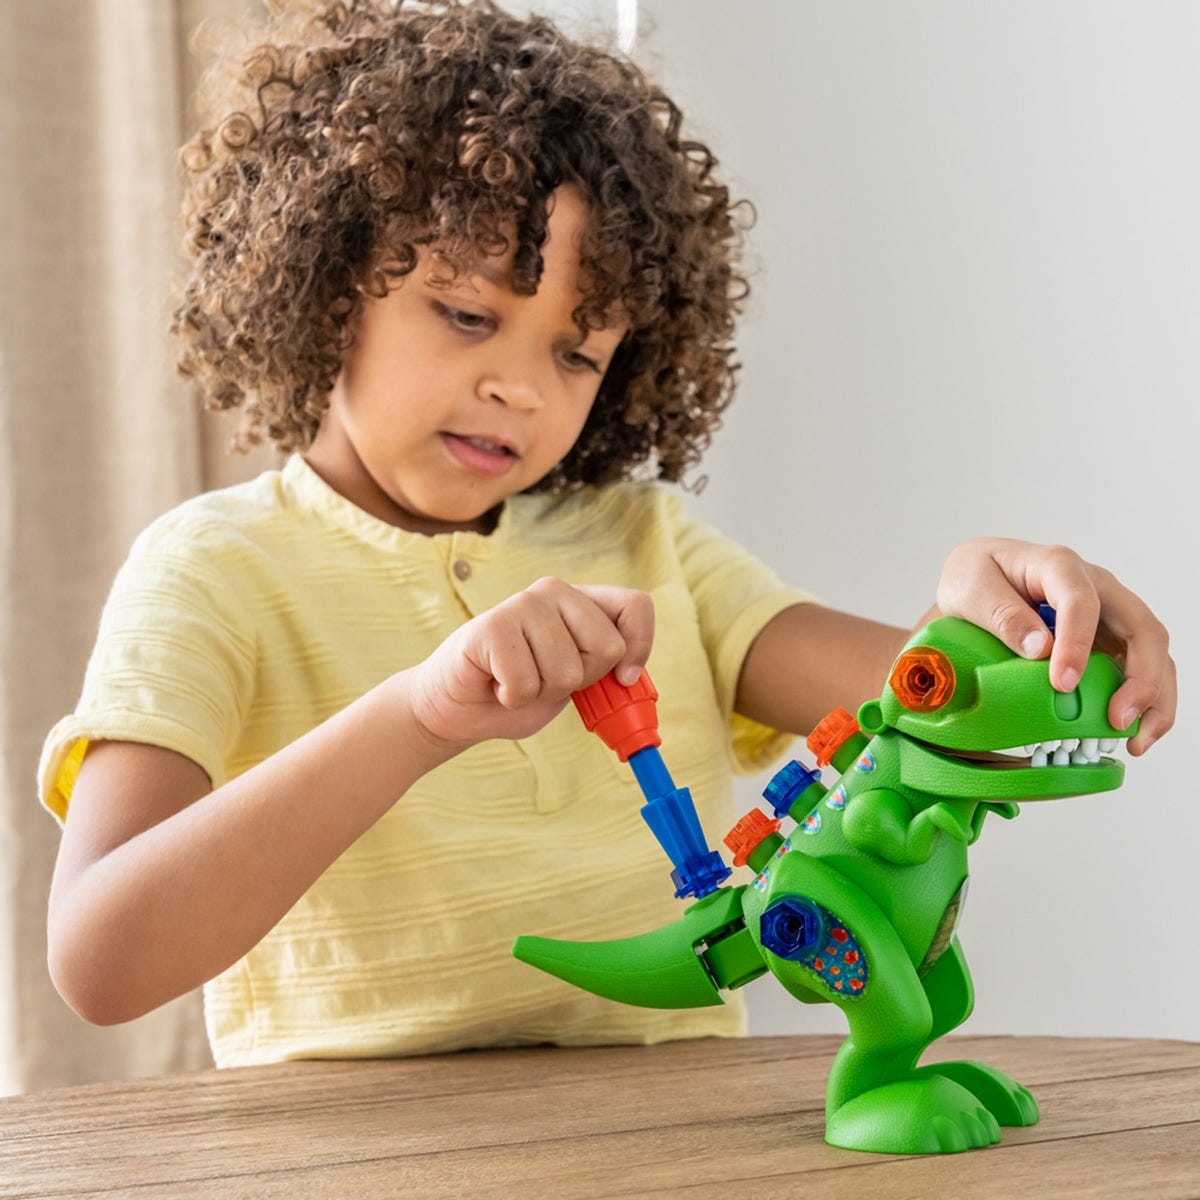 Design & Drill® Take-Apart T-Rex, Build your own T-rex with this dinosaur construction kit for preschoolers from Design & Drill®! Children use tools perfectly-sized for little hands to tinker with their very own dinosaur toy with moveable mouth and legs. Snap the 4 pieces together, and then use the kid-sized screwdriver to screw in the chunky, colourful bolts. Then head off into roar-some imaginative play with the Design & Drill Take-Apart T-Rex. Kids roar into creative play and build coordination skills as